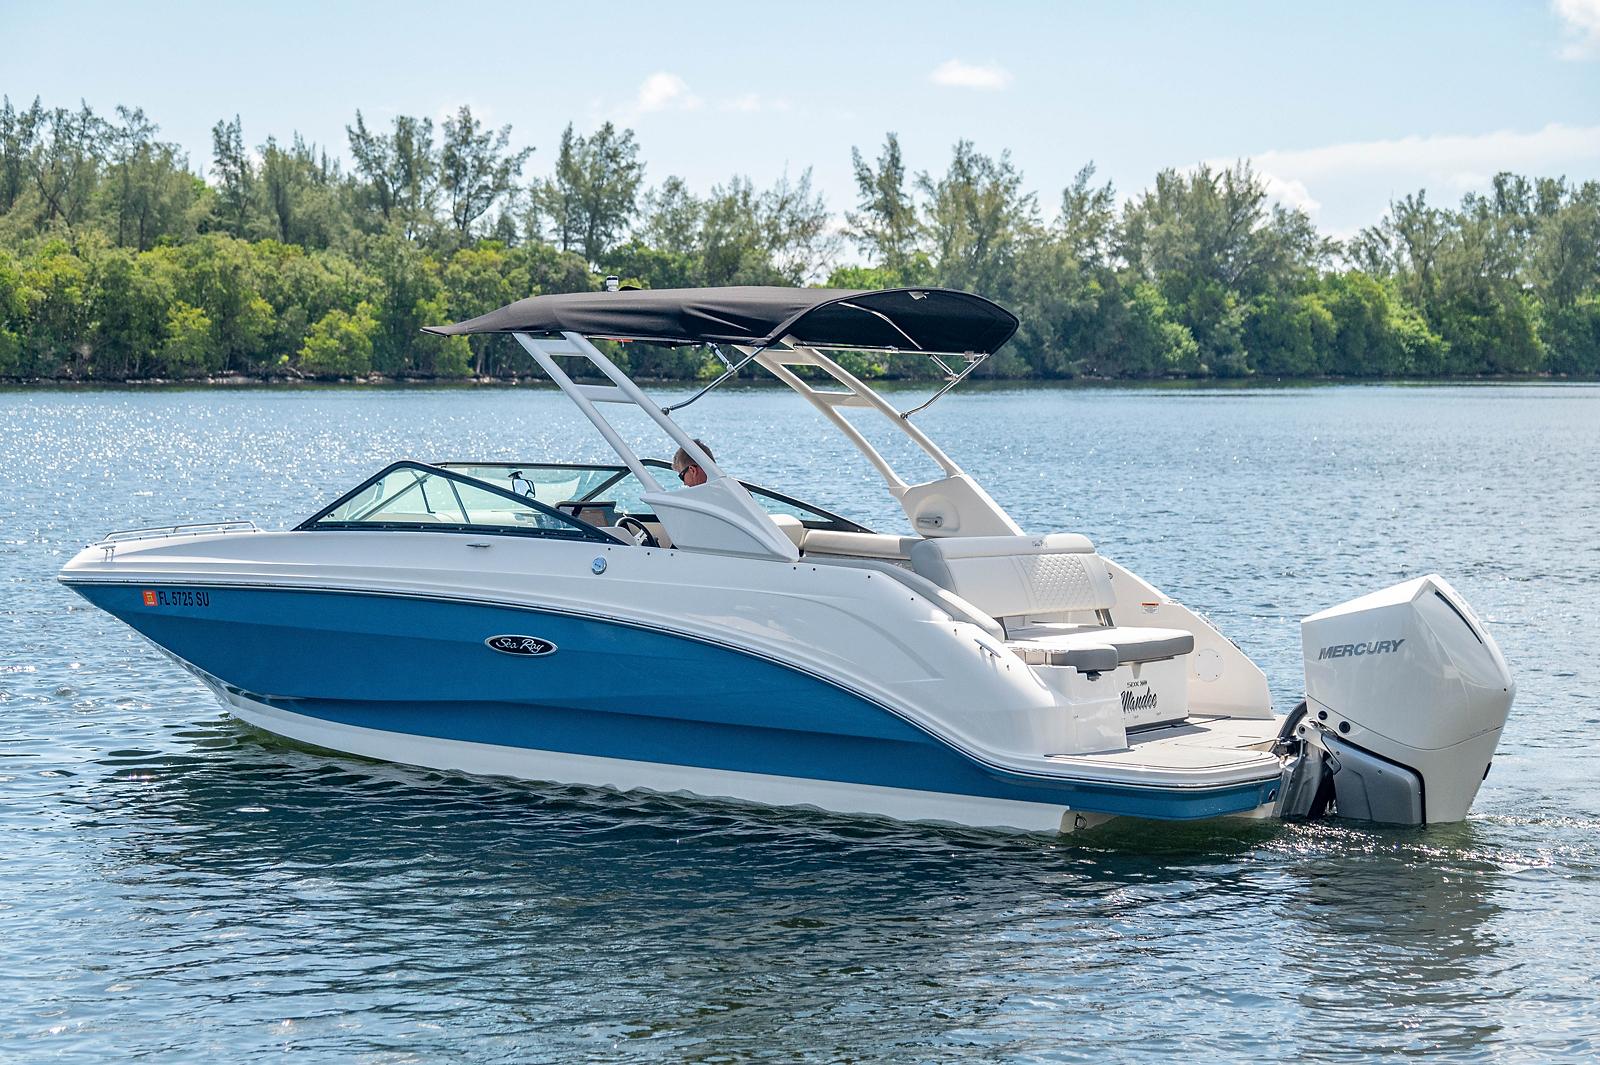 2021 Sea Ray 25 SDX Runabout for sale - YachtWorld